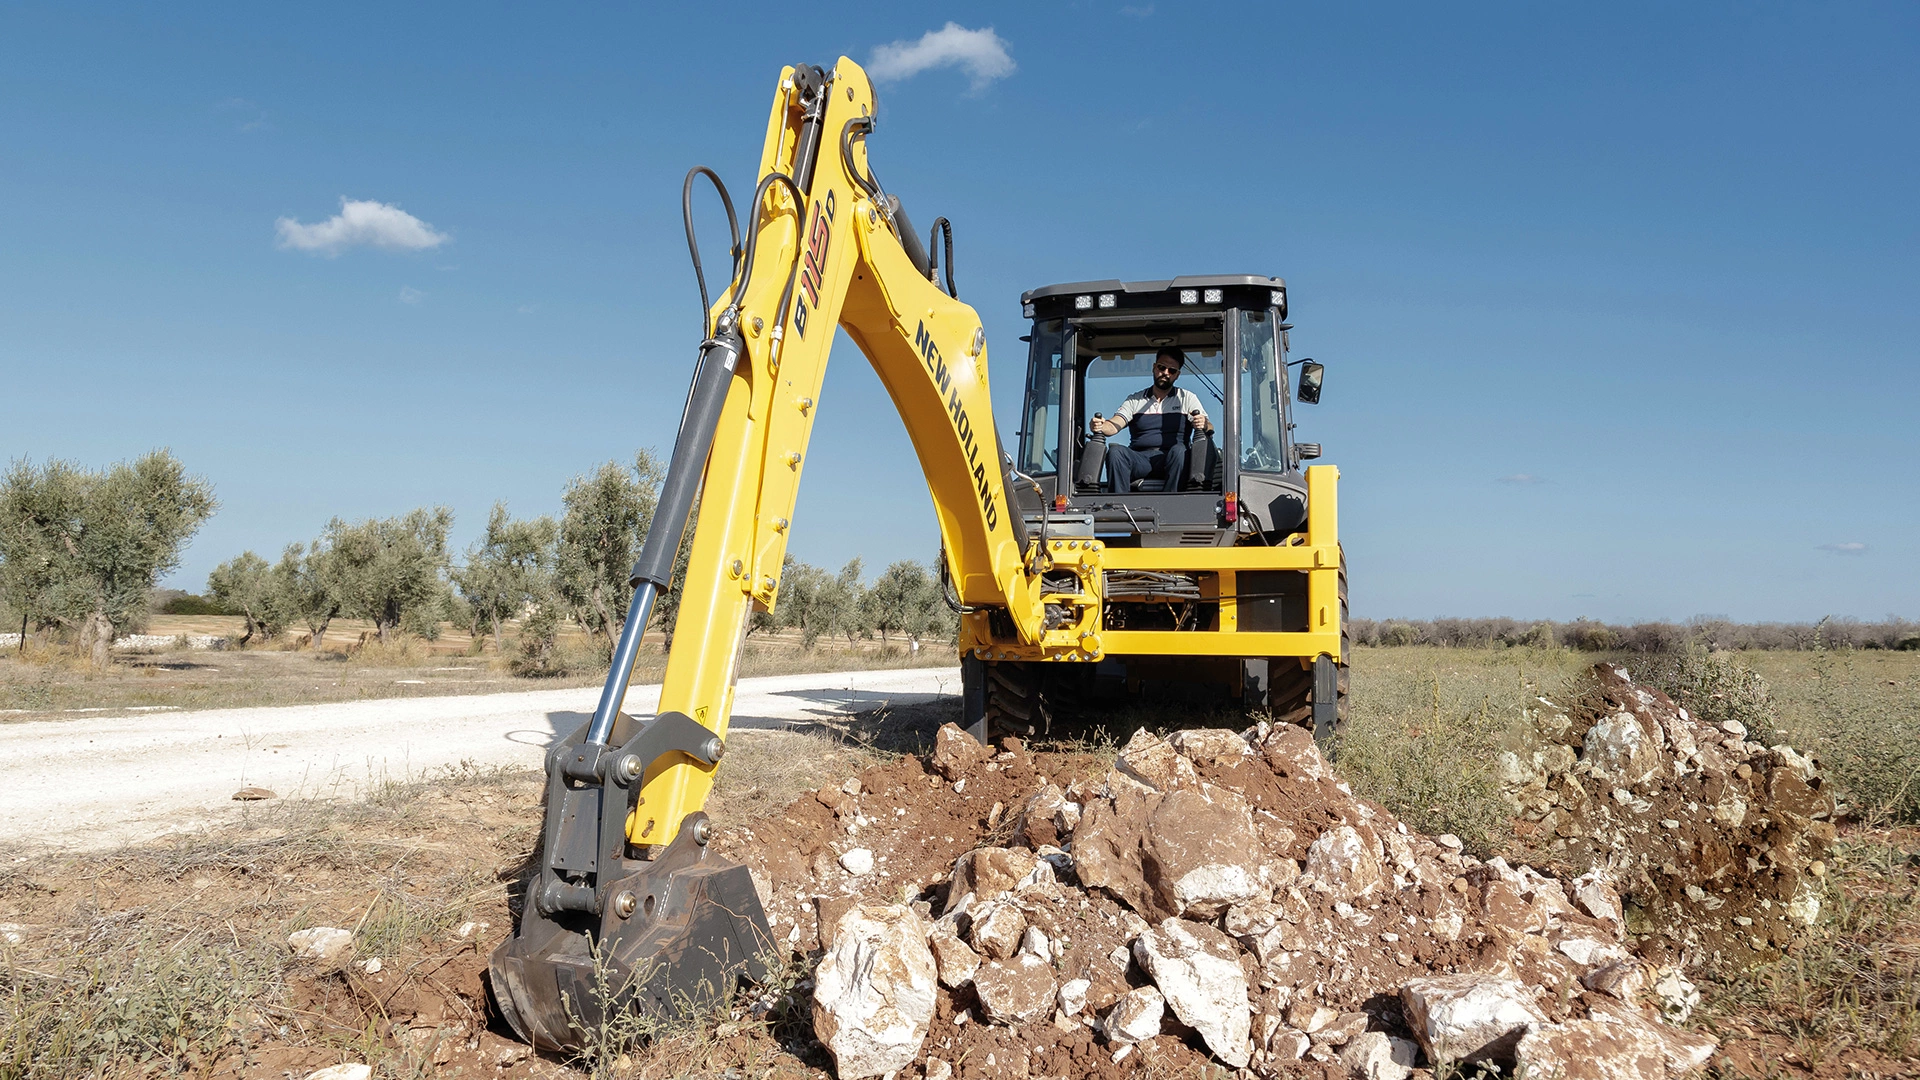 New Holland Backhoe at work, digging in rocky terrain, clear sky, operator in cabin, olive trees in background.